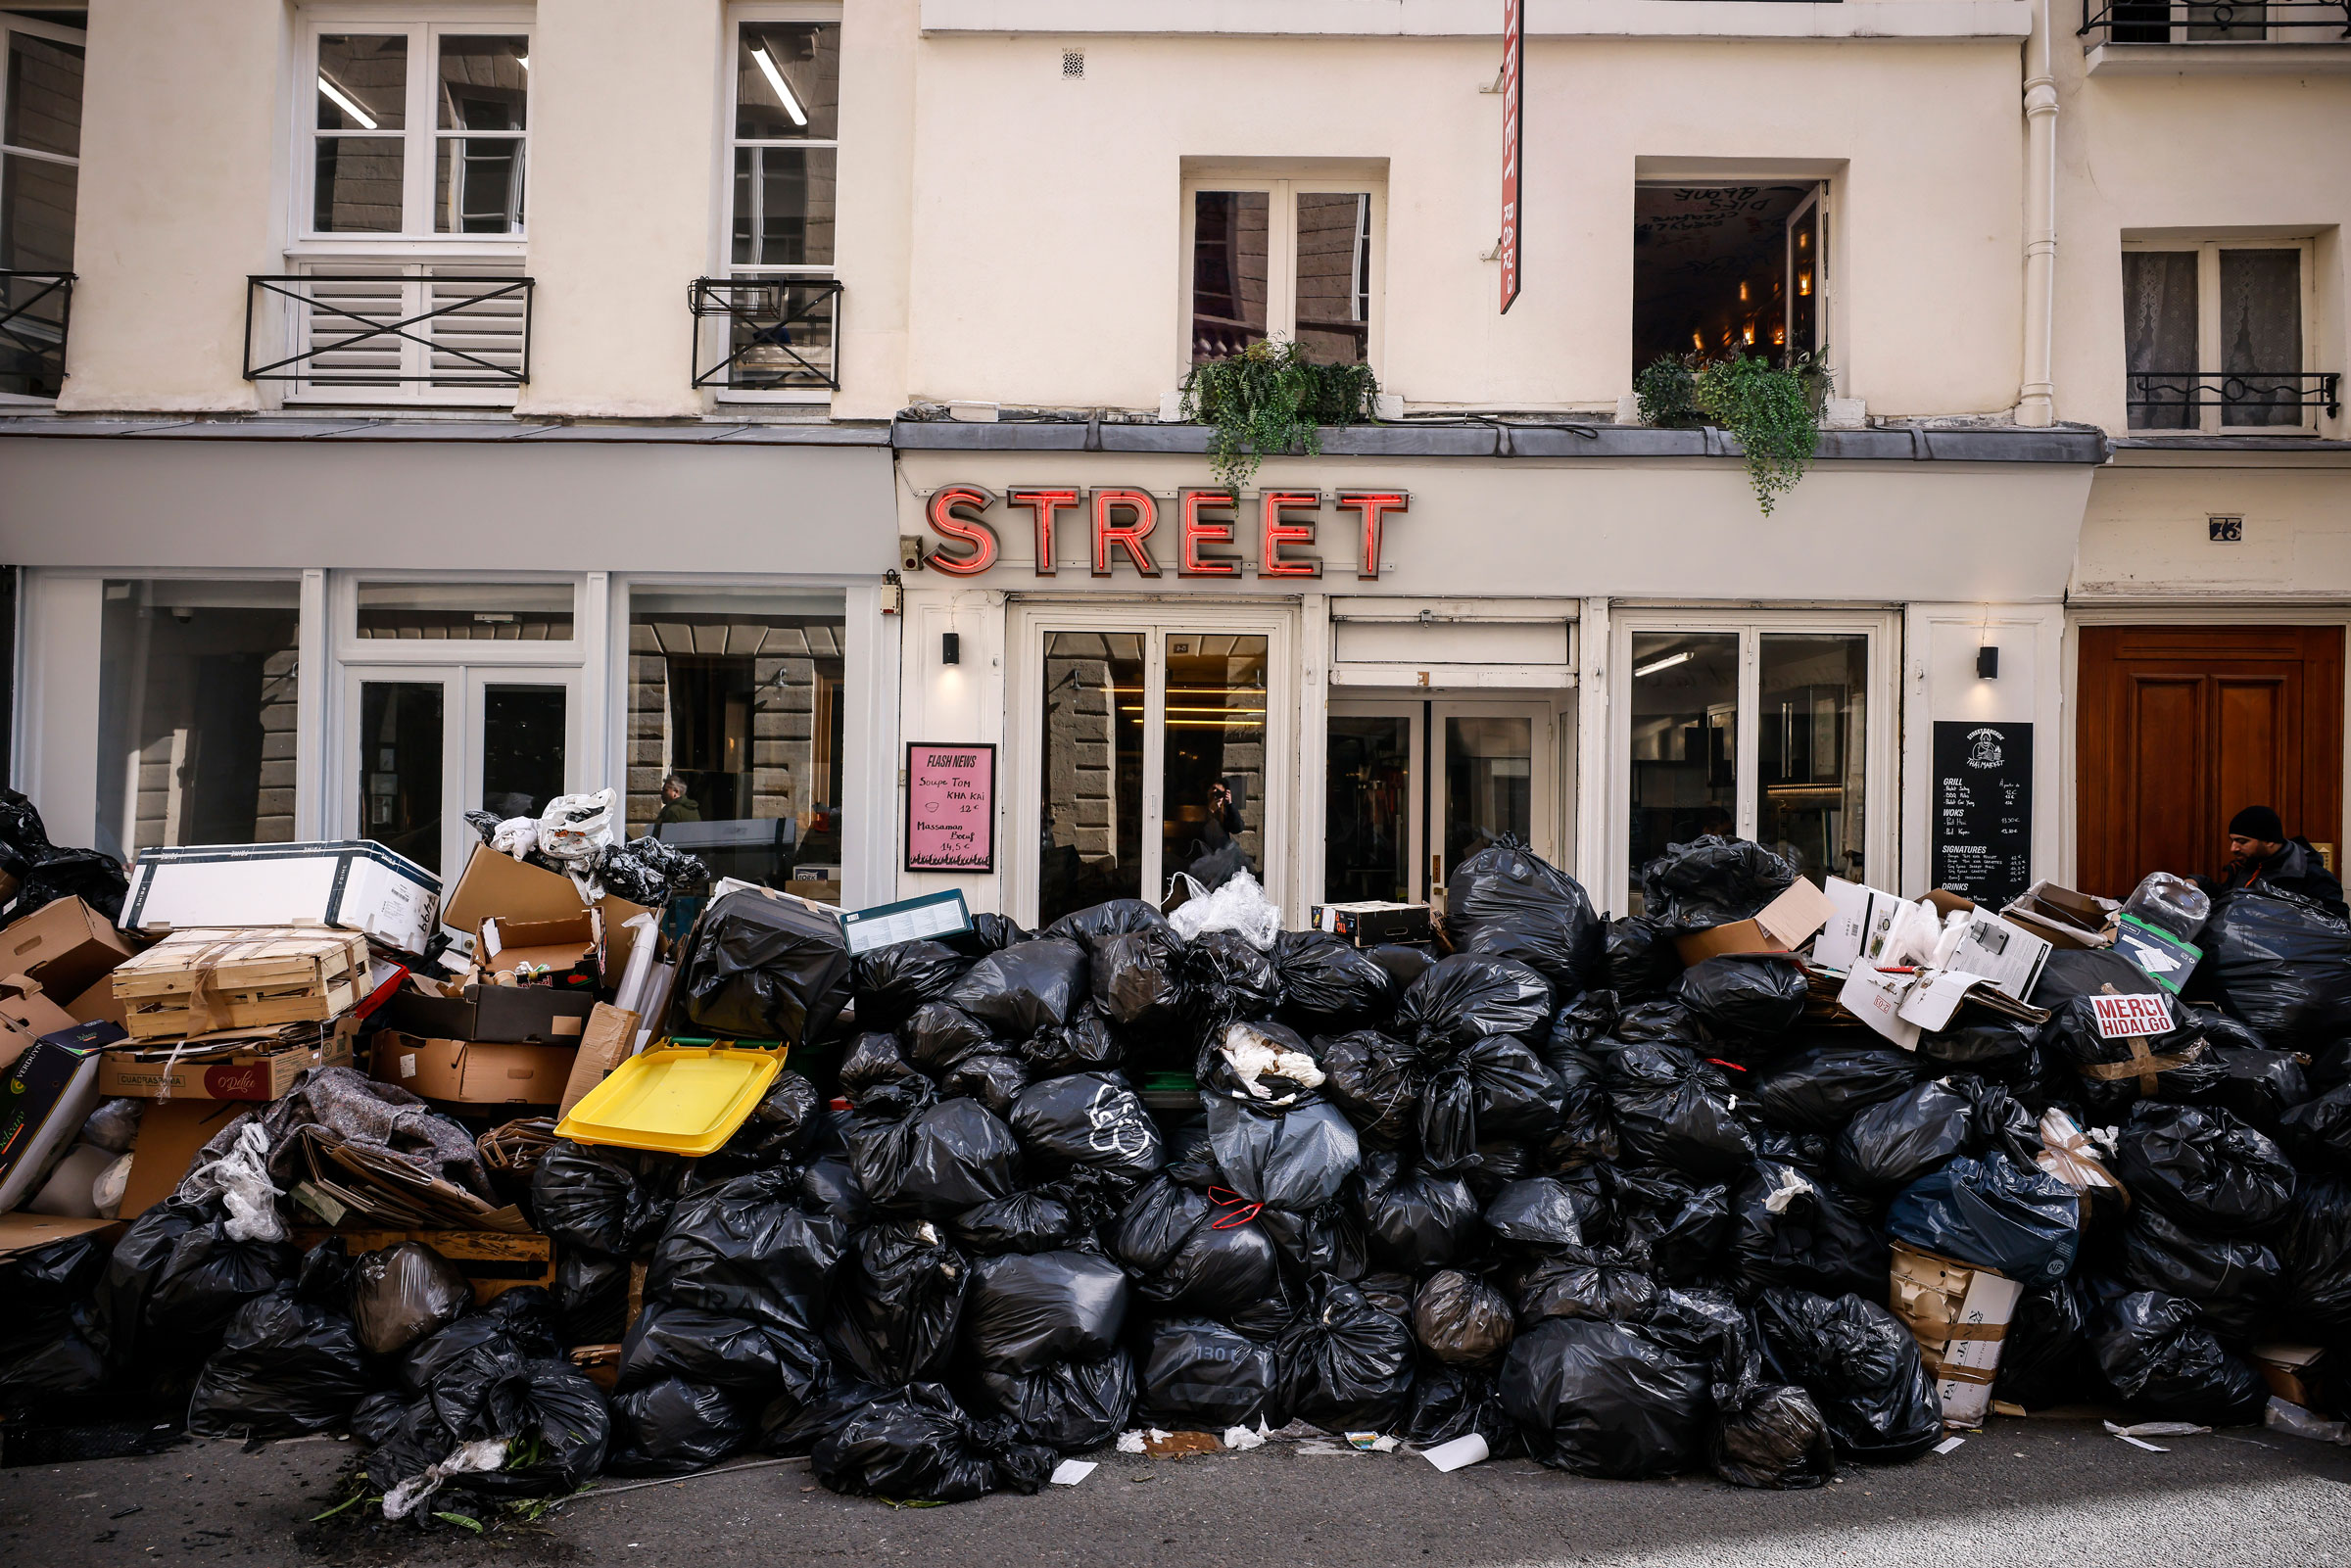 Uncollected garbage is piled up on a street in Paris during an ongoing strike by sanitation workers, on March 15, 2023. (Thomas Padilla—AP)